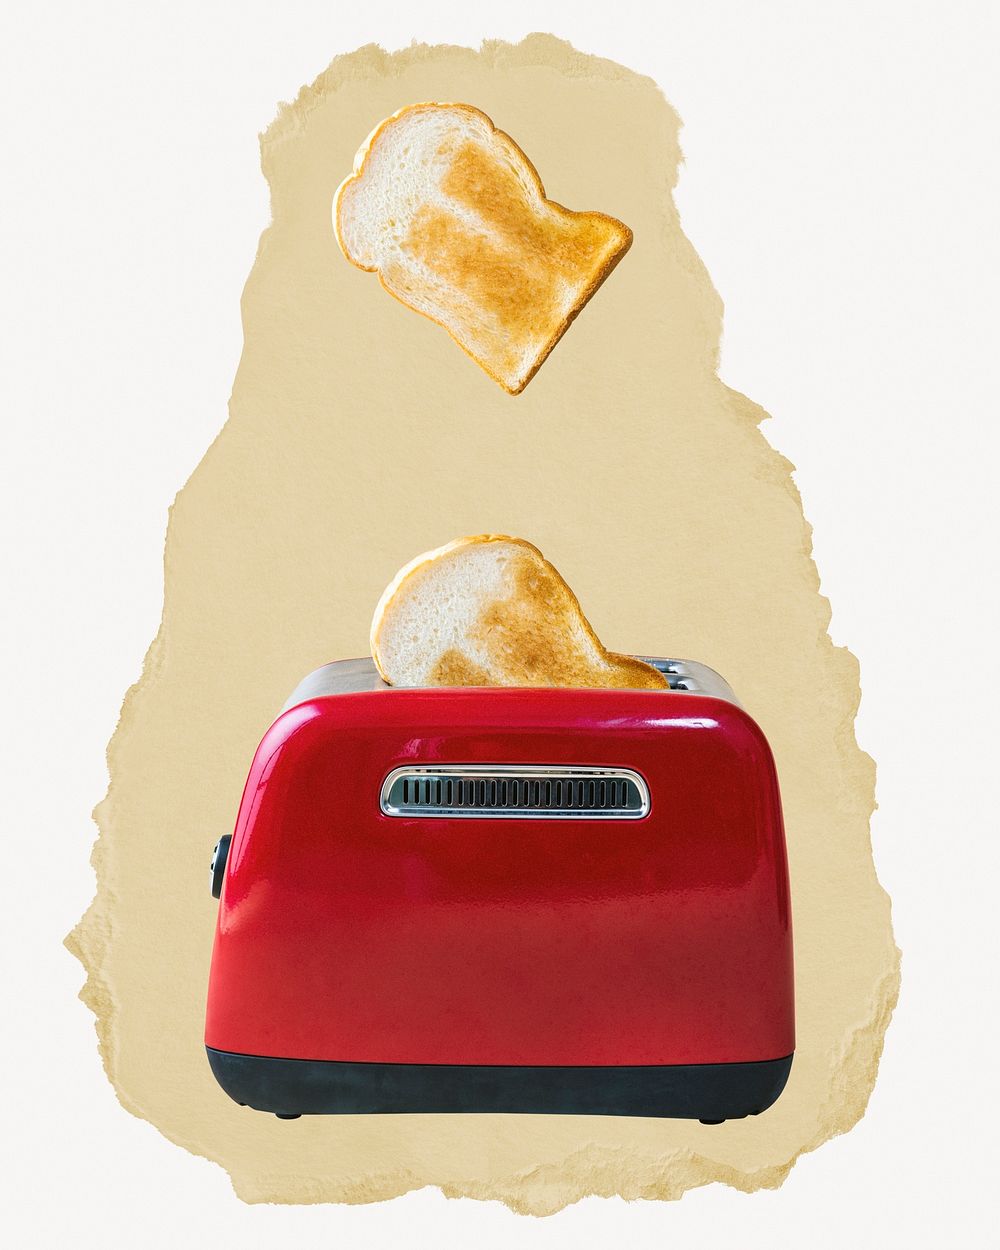 Toaster, food on torn paper